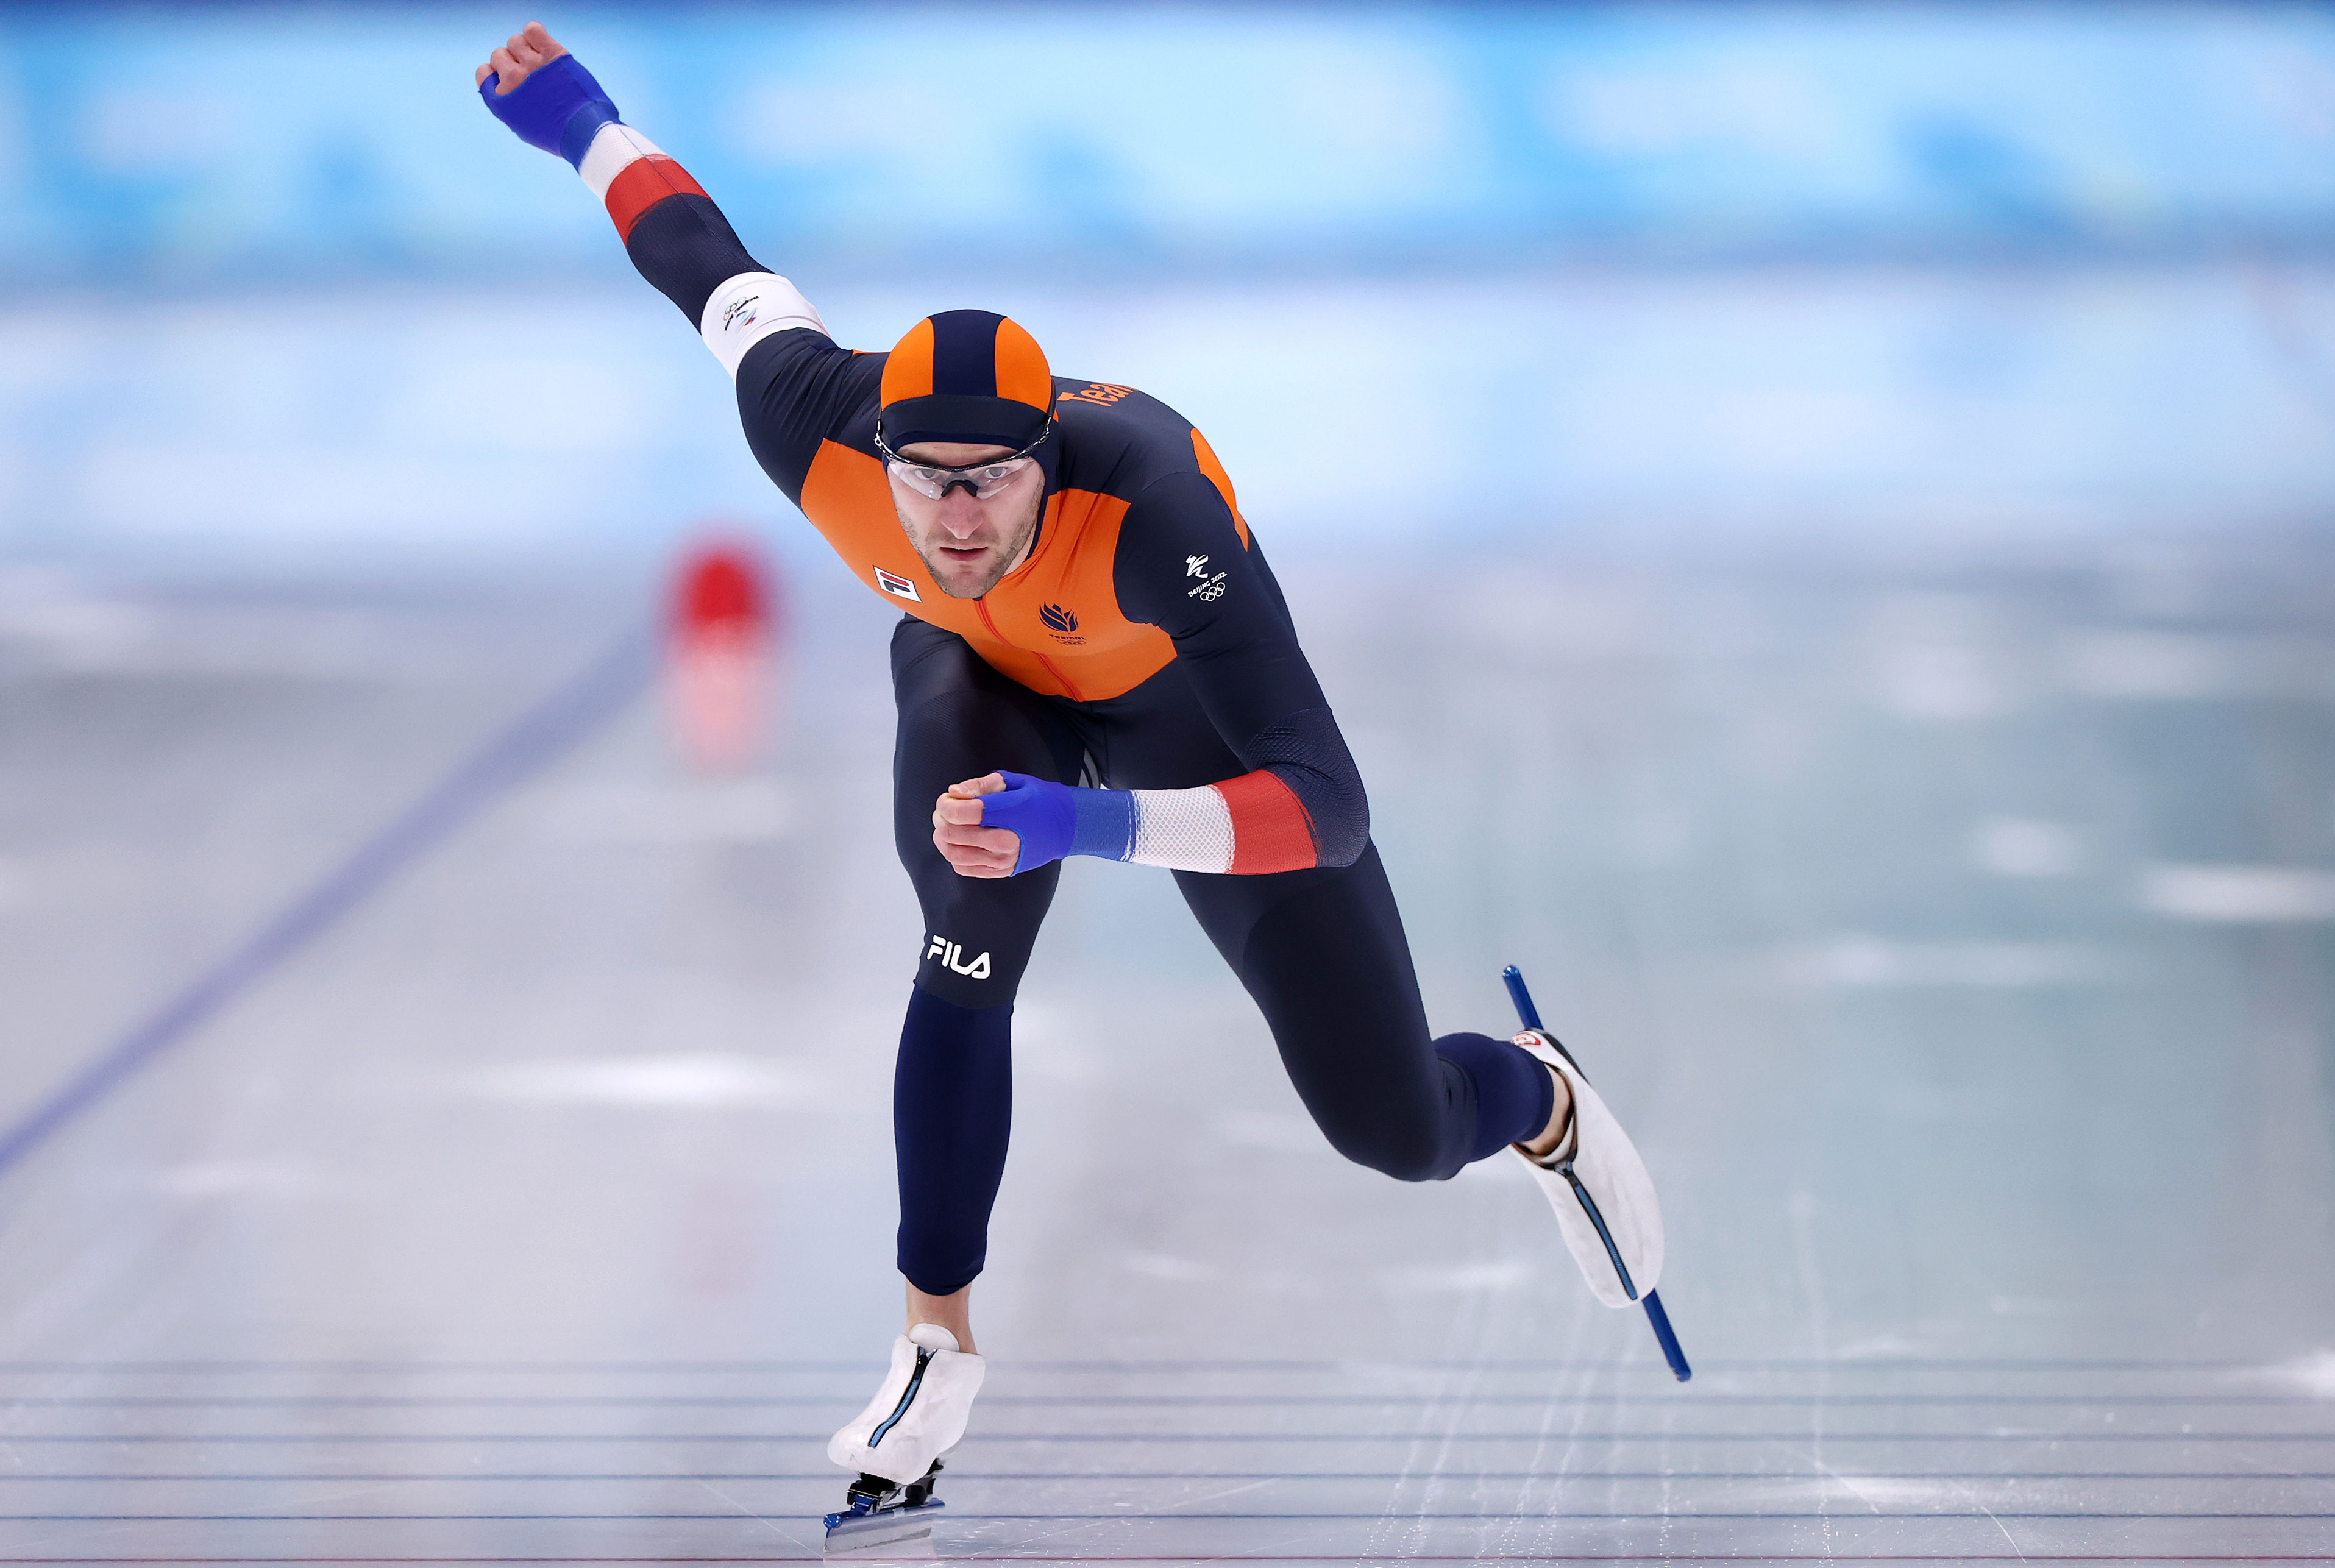 Thomas Krol of the Netherlands skates during the men's 1,000m on Friday.